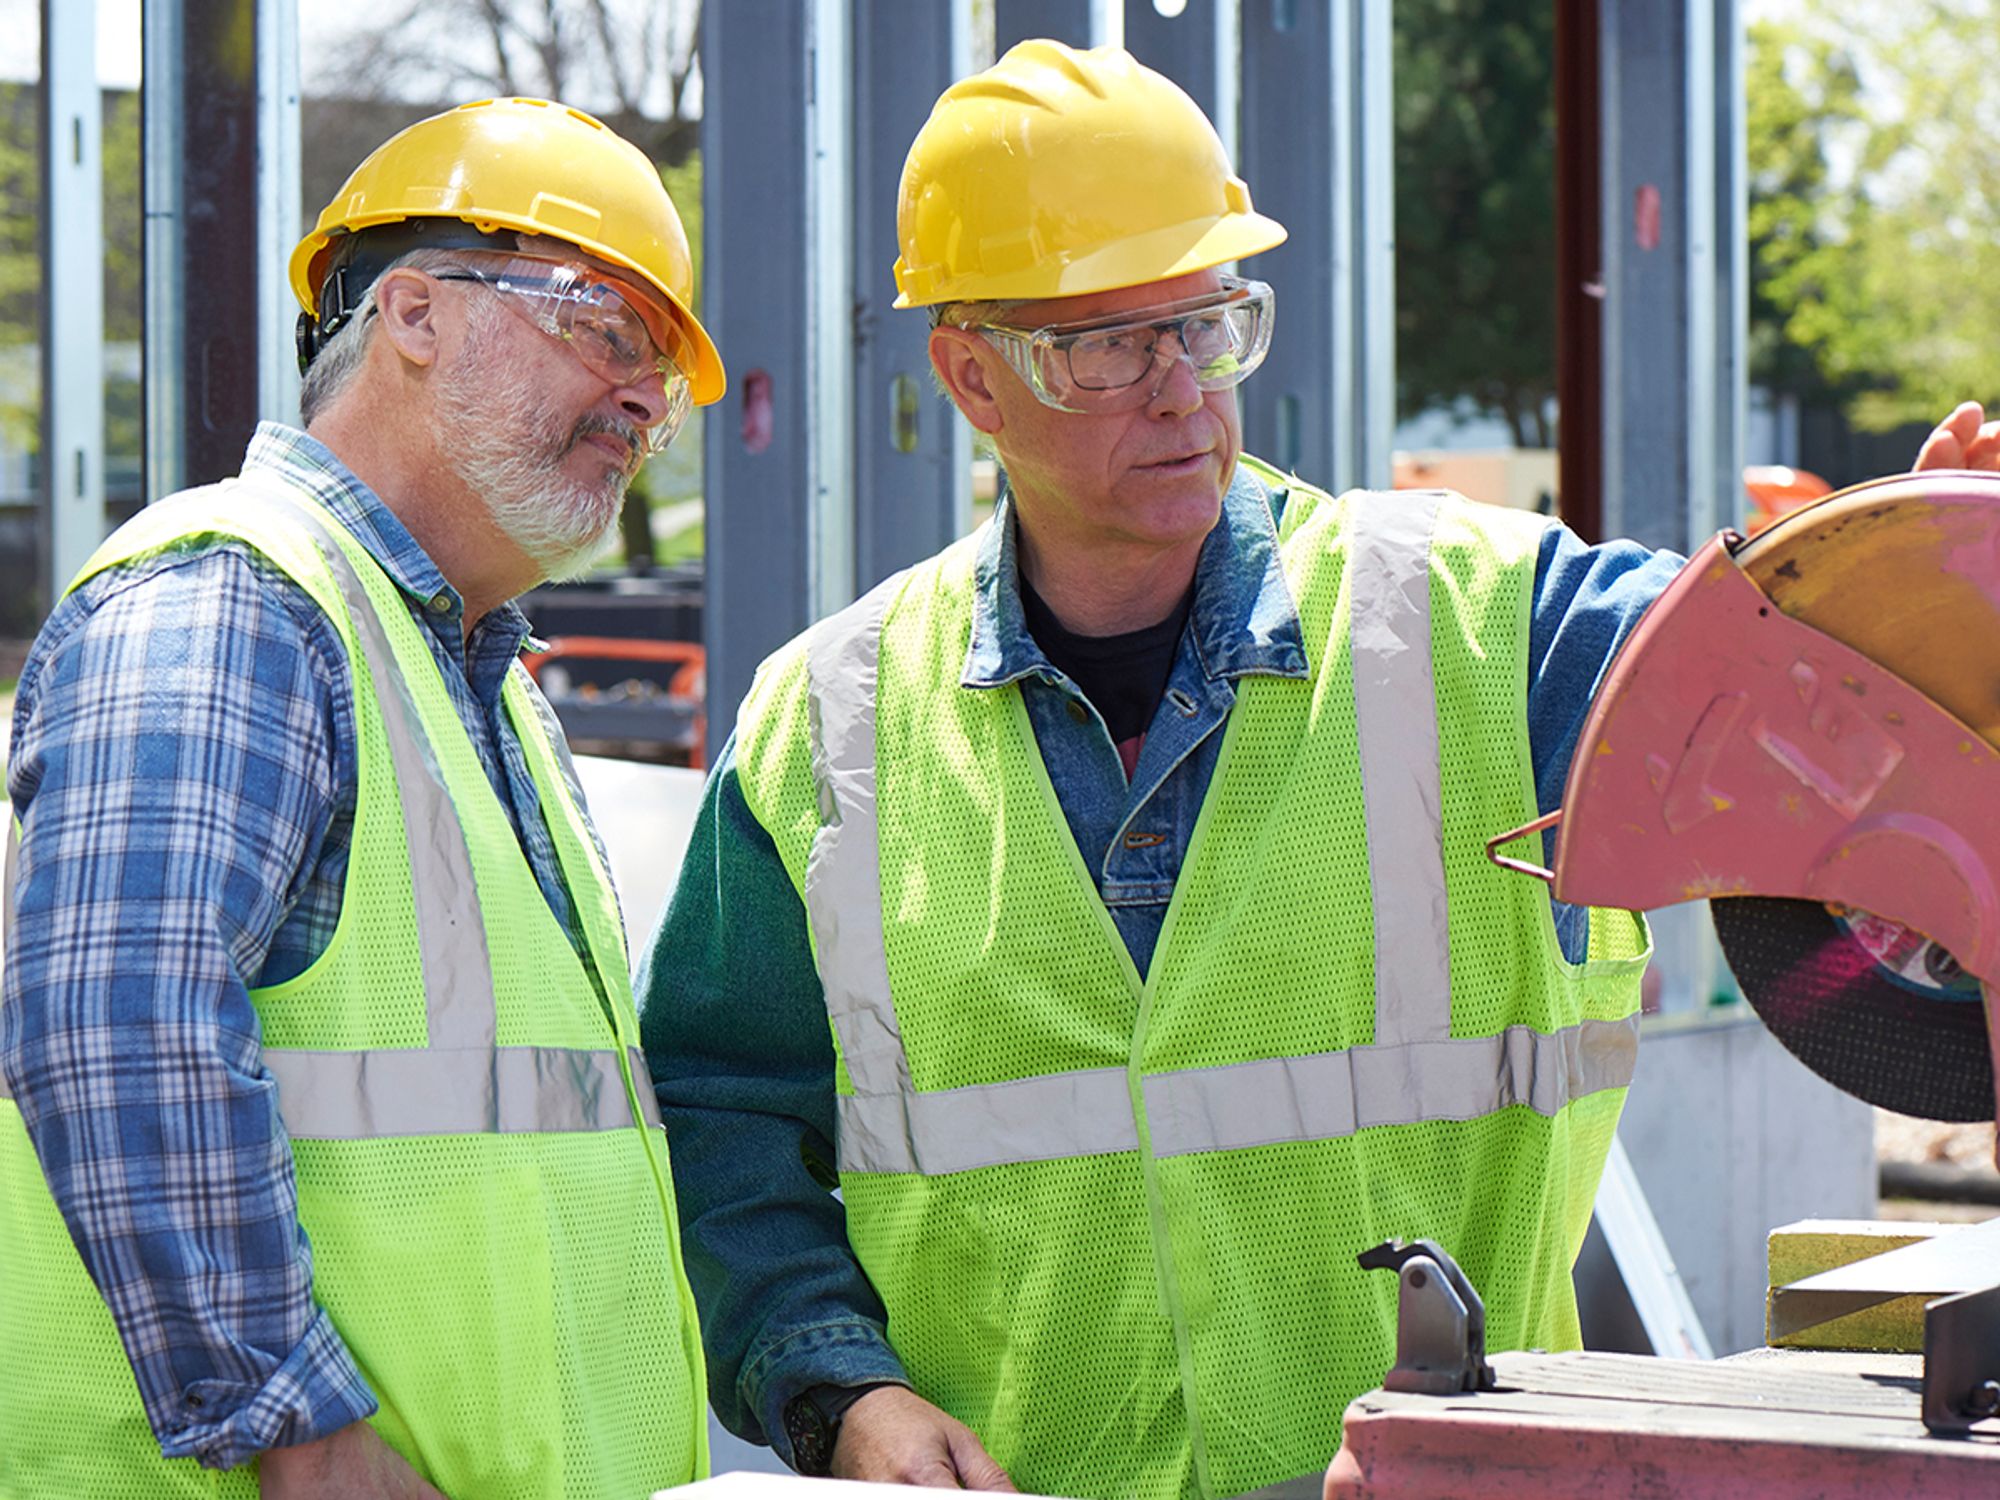 What must an employer look for when inspecting saws?